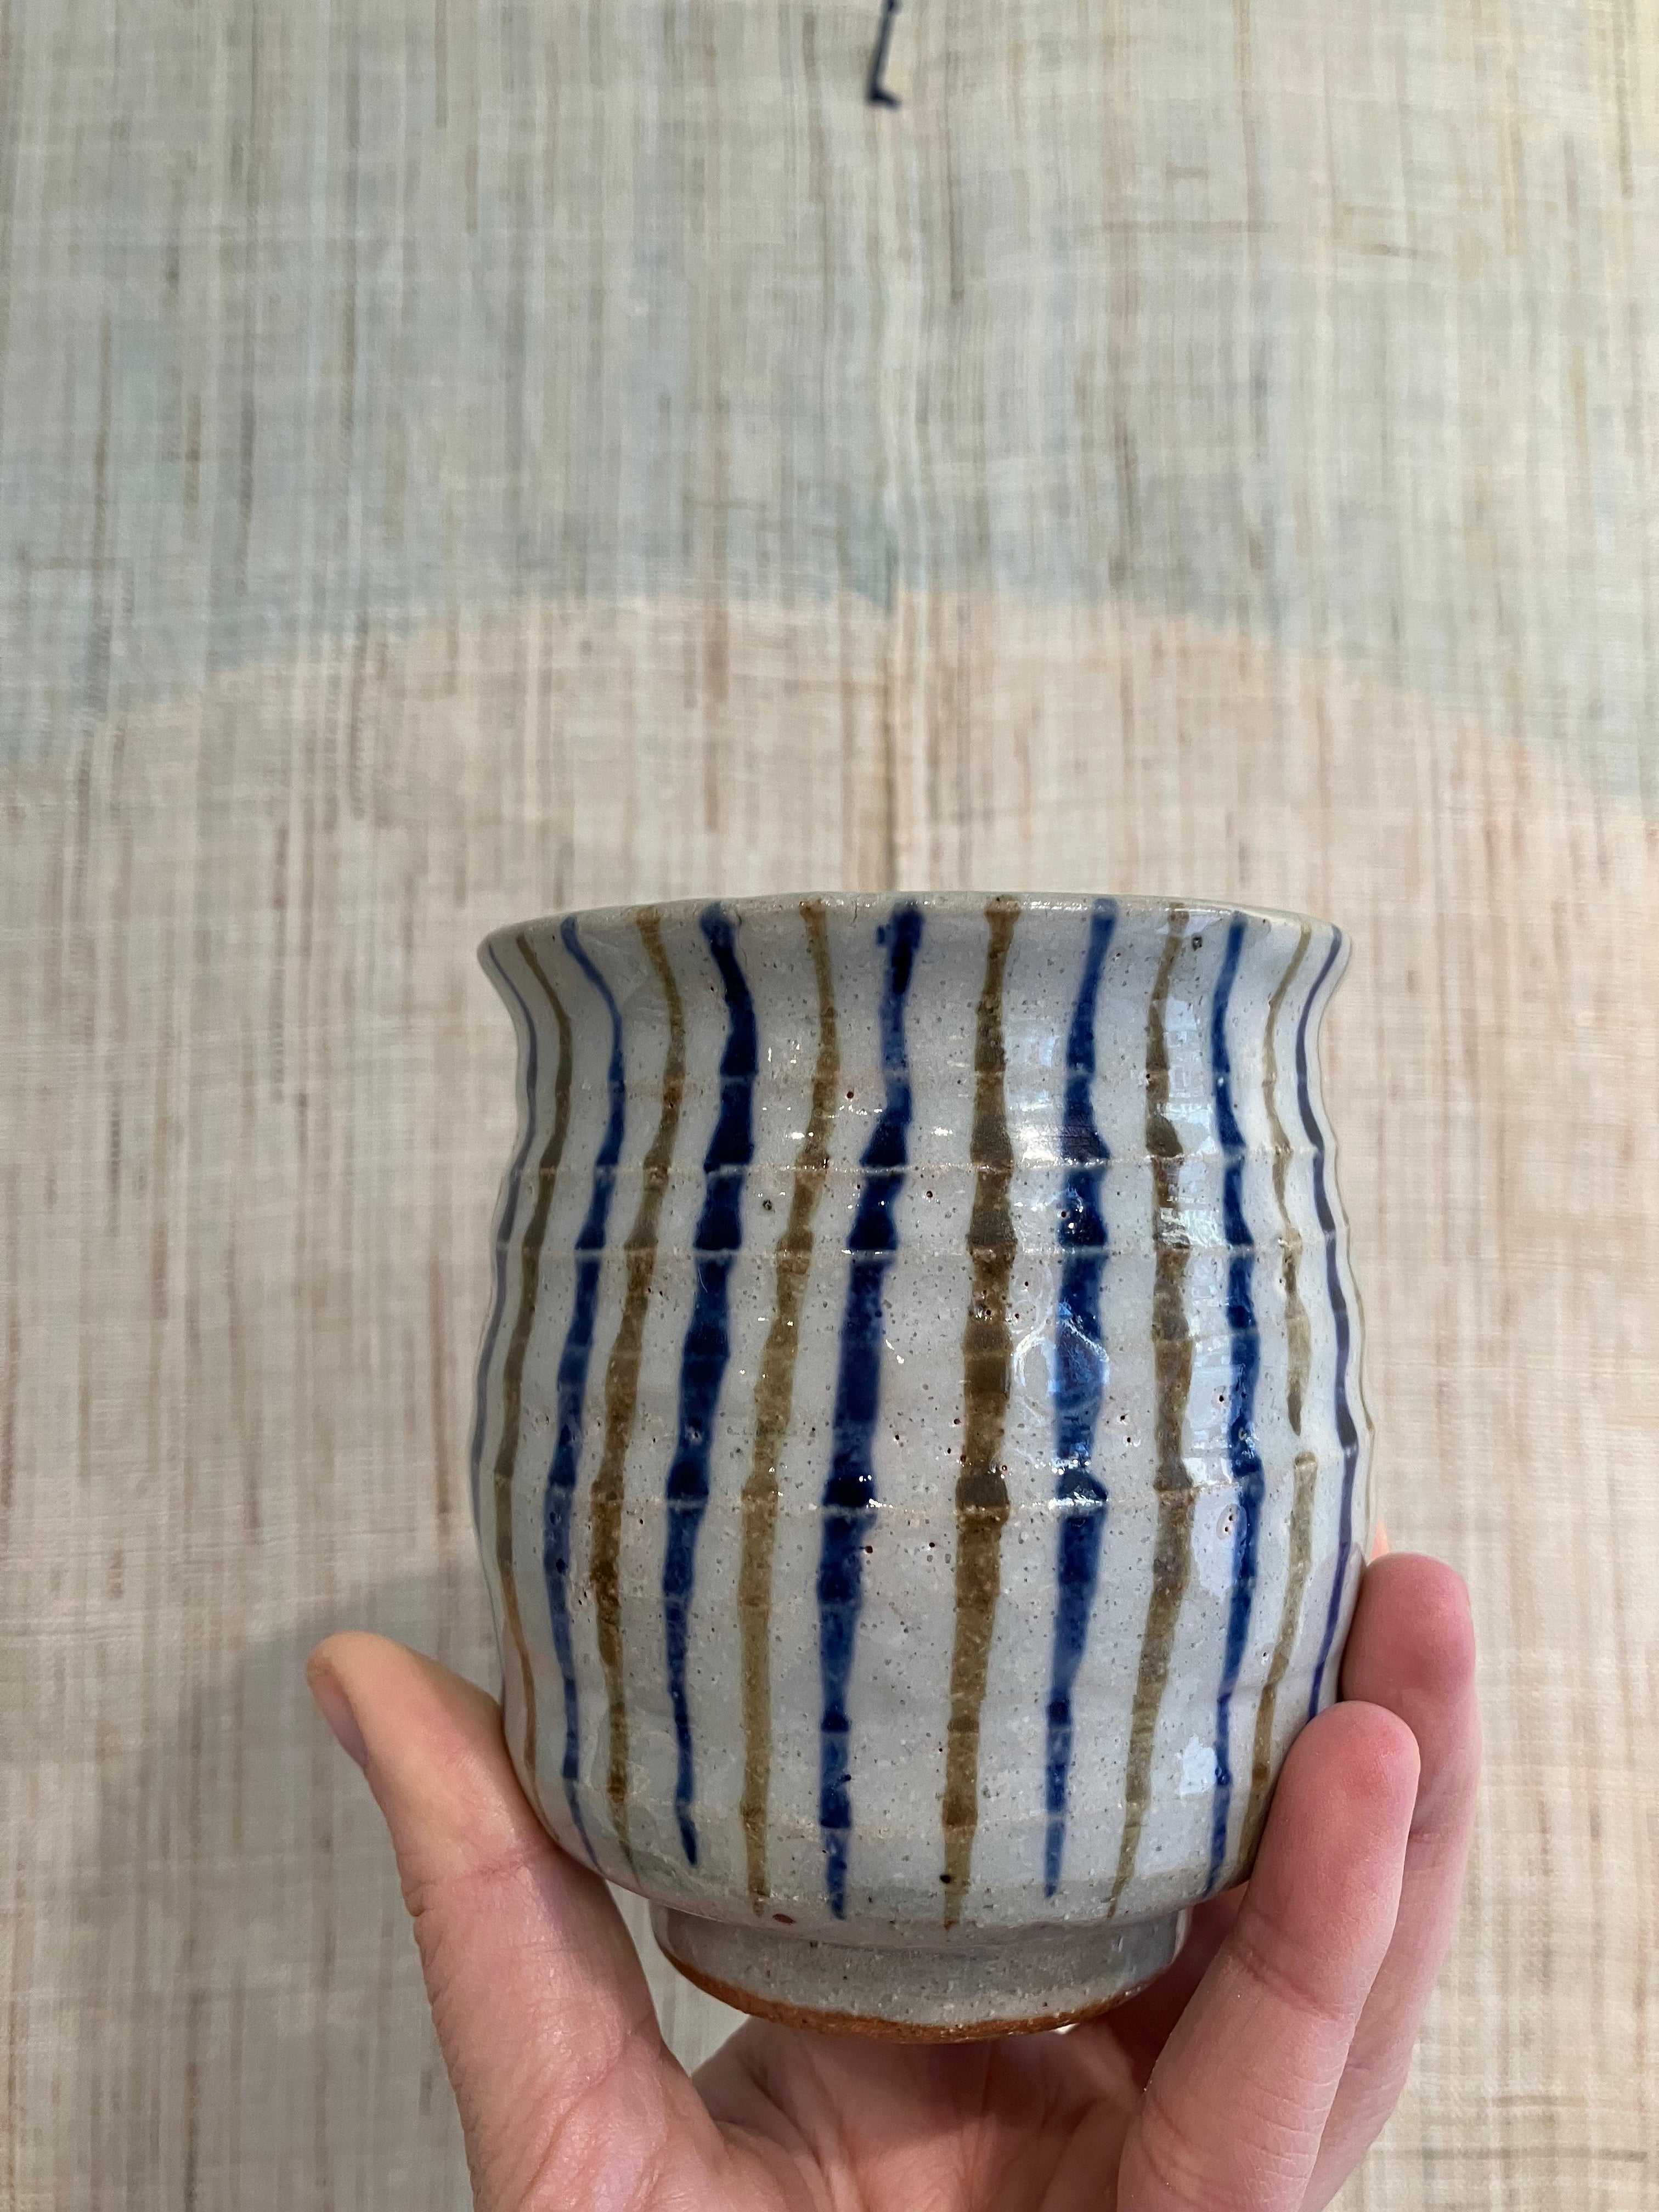 Large striped cup with blue and brown stripes